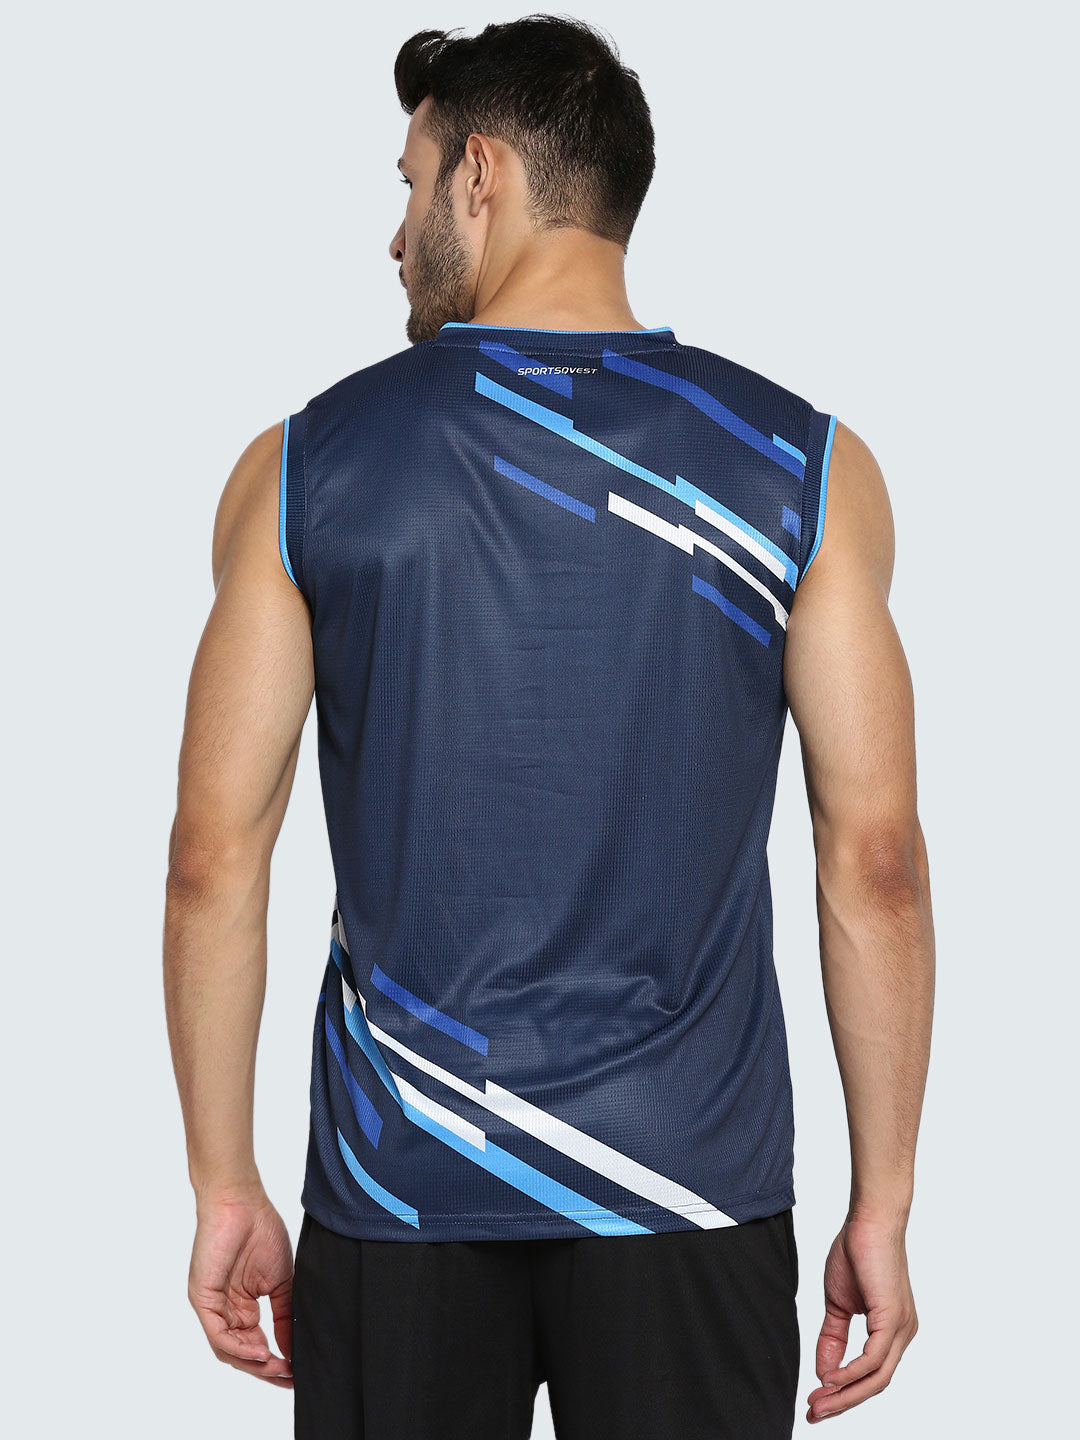 Men's Abstract Basketball Vest: Navy Blue - Front